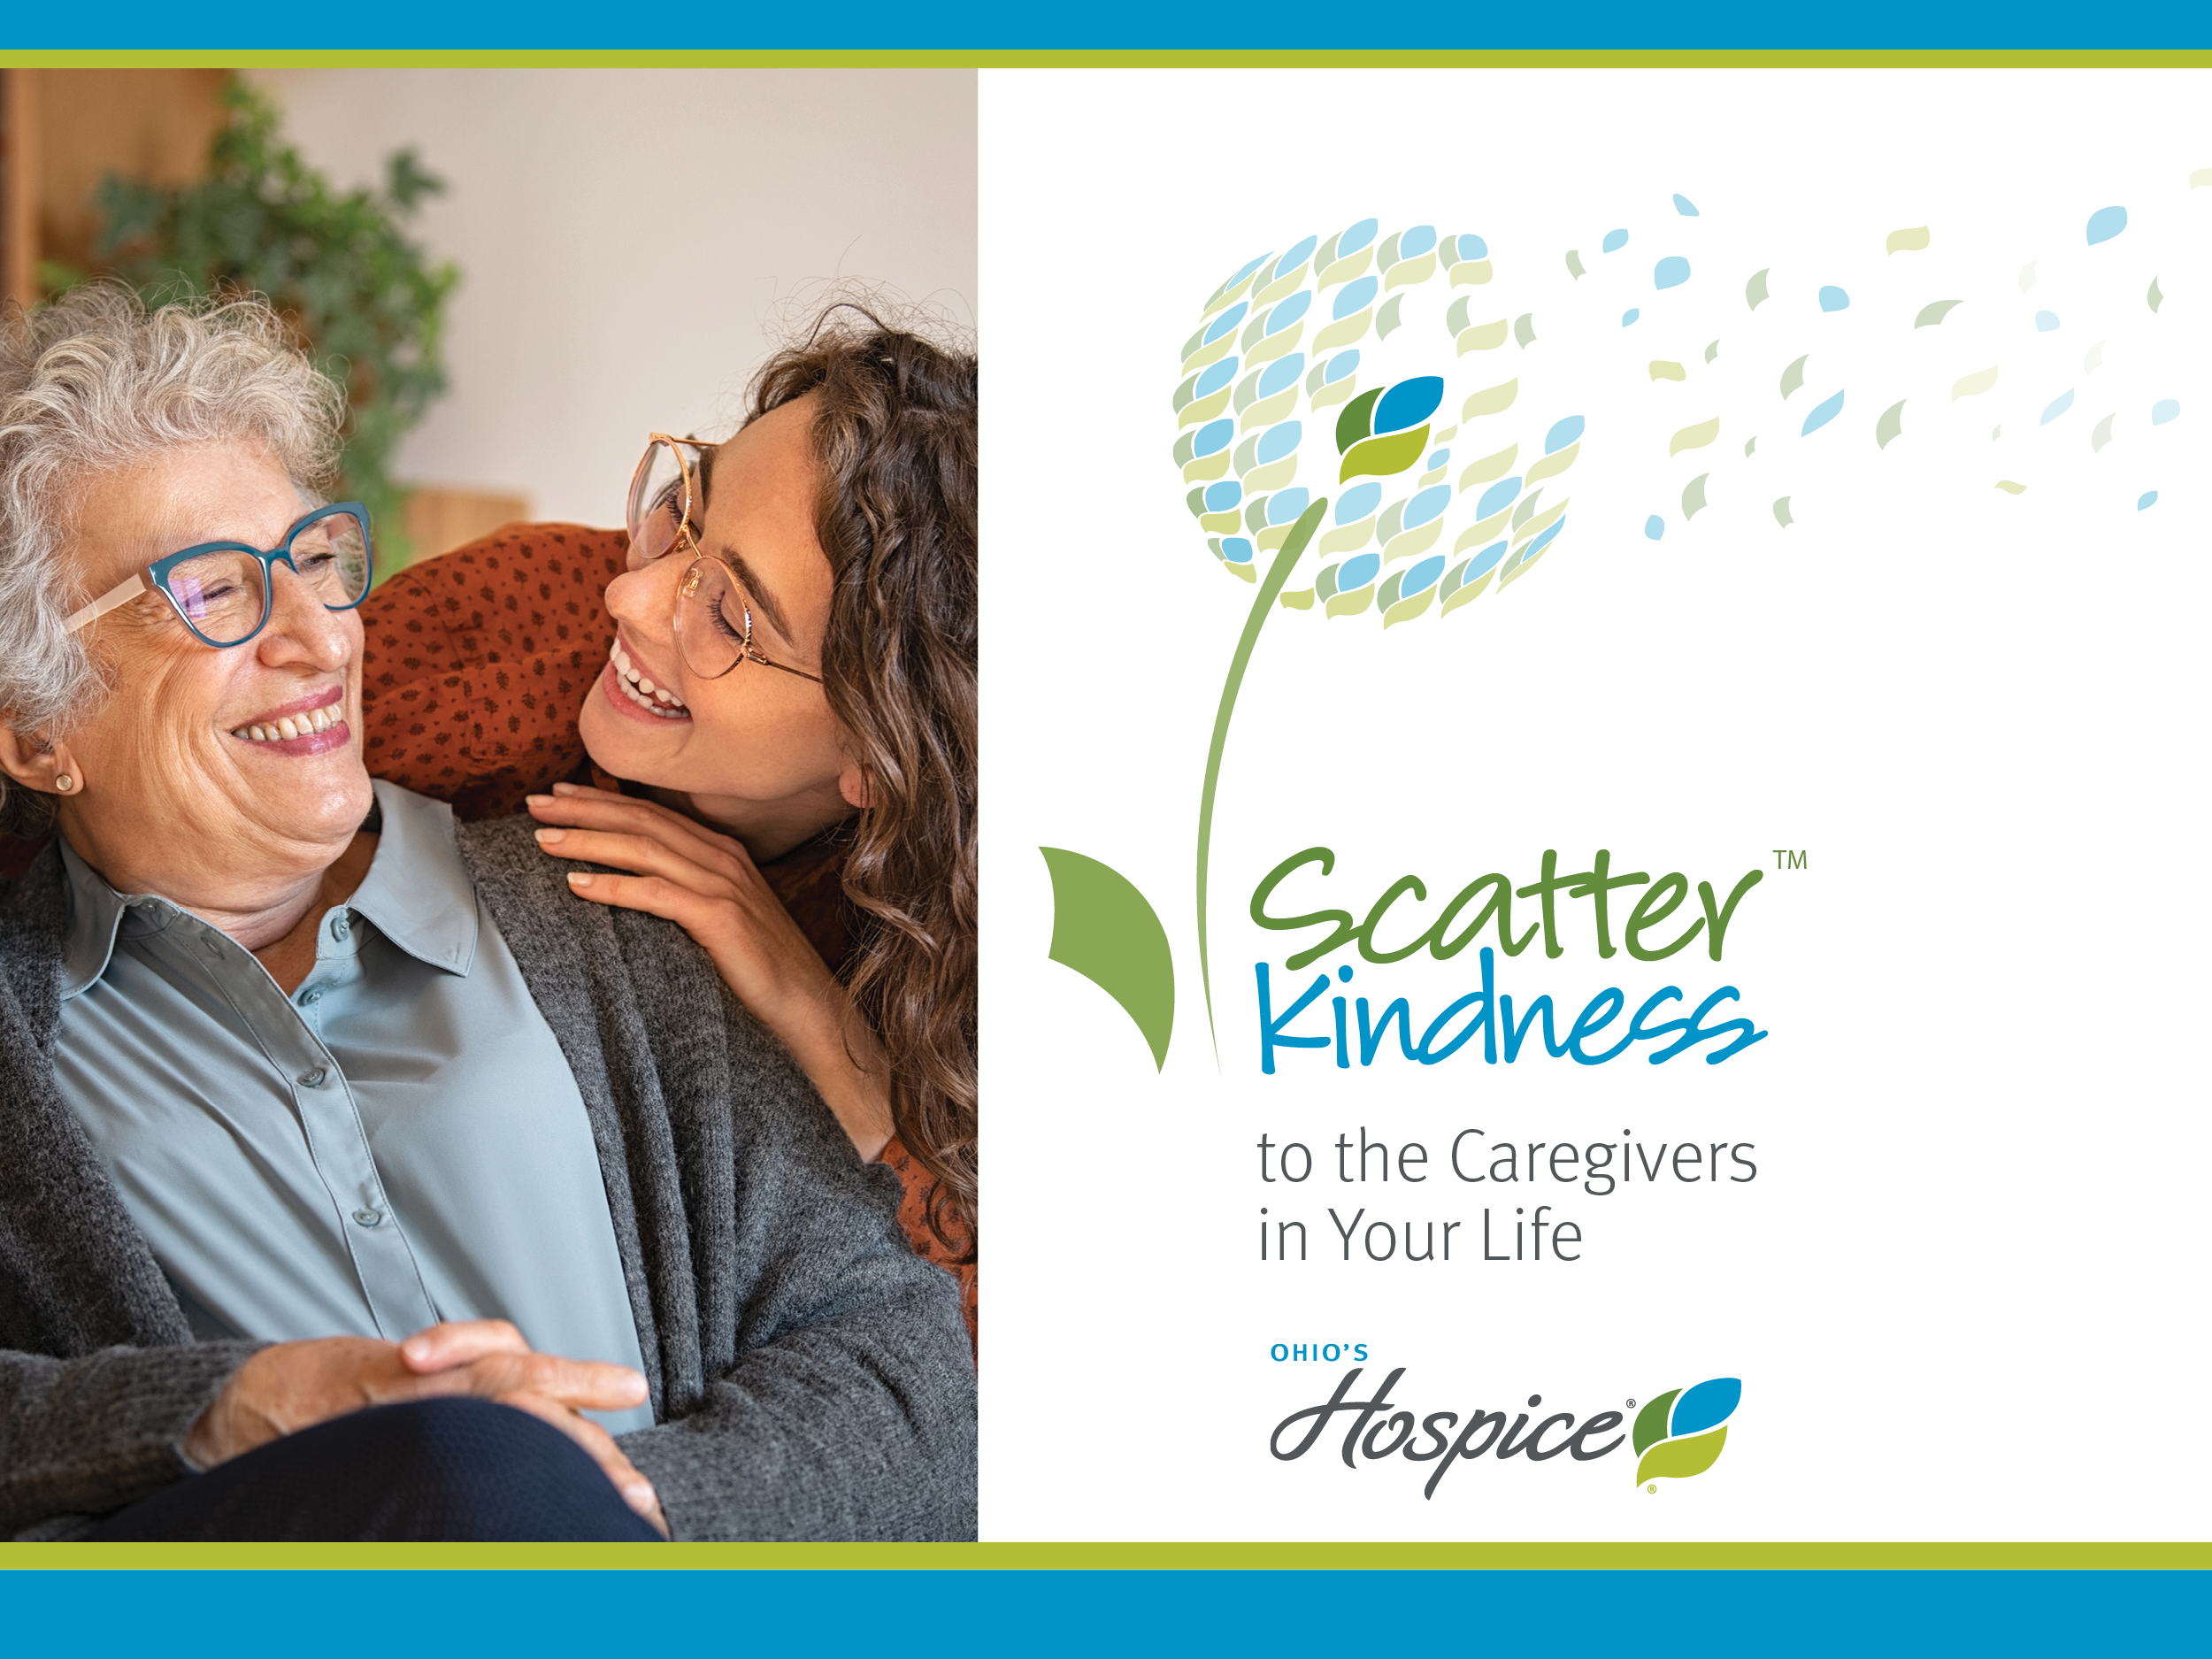 Scatter Kindness to the Caregivers in Your Life